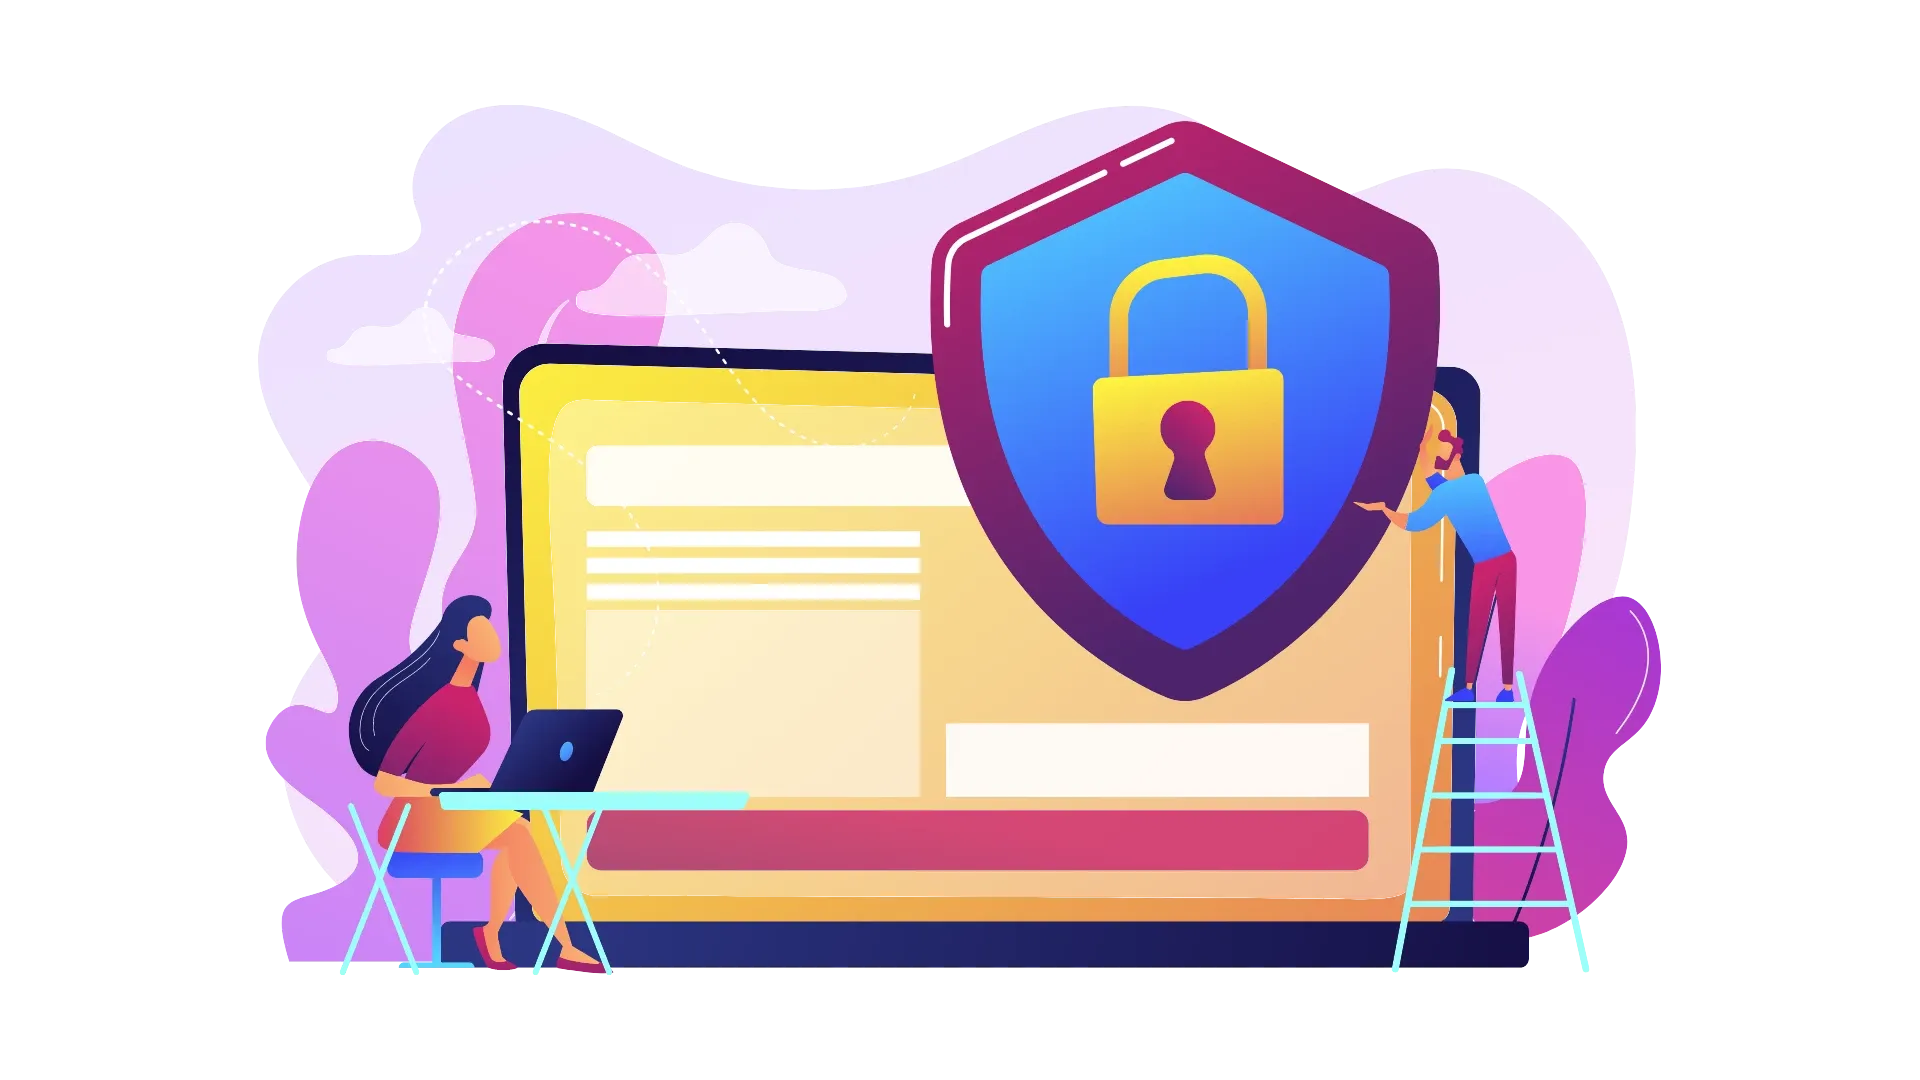 Security and Privacy SaaS business ideas